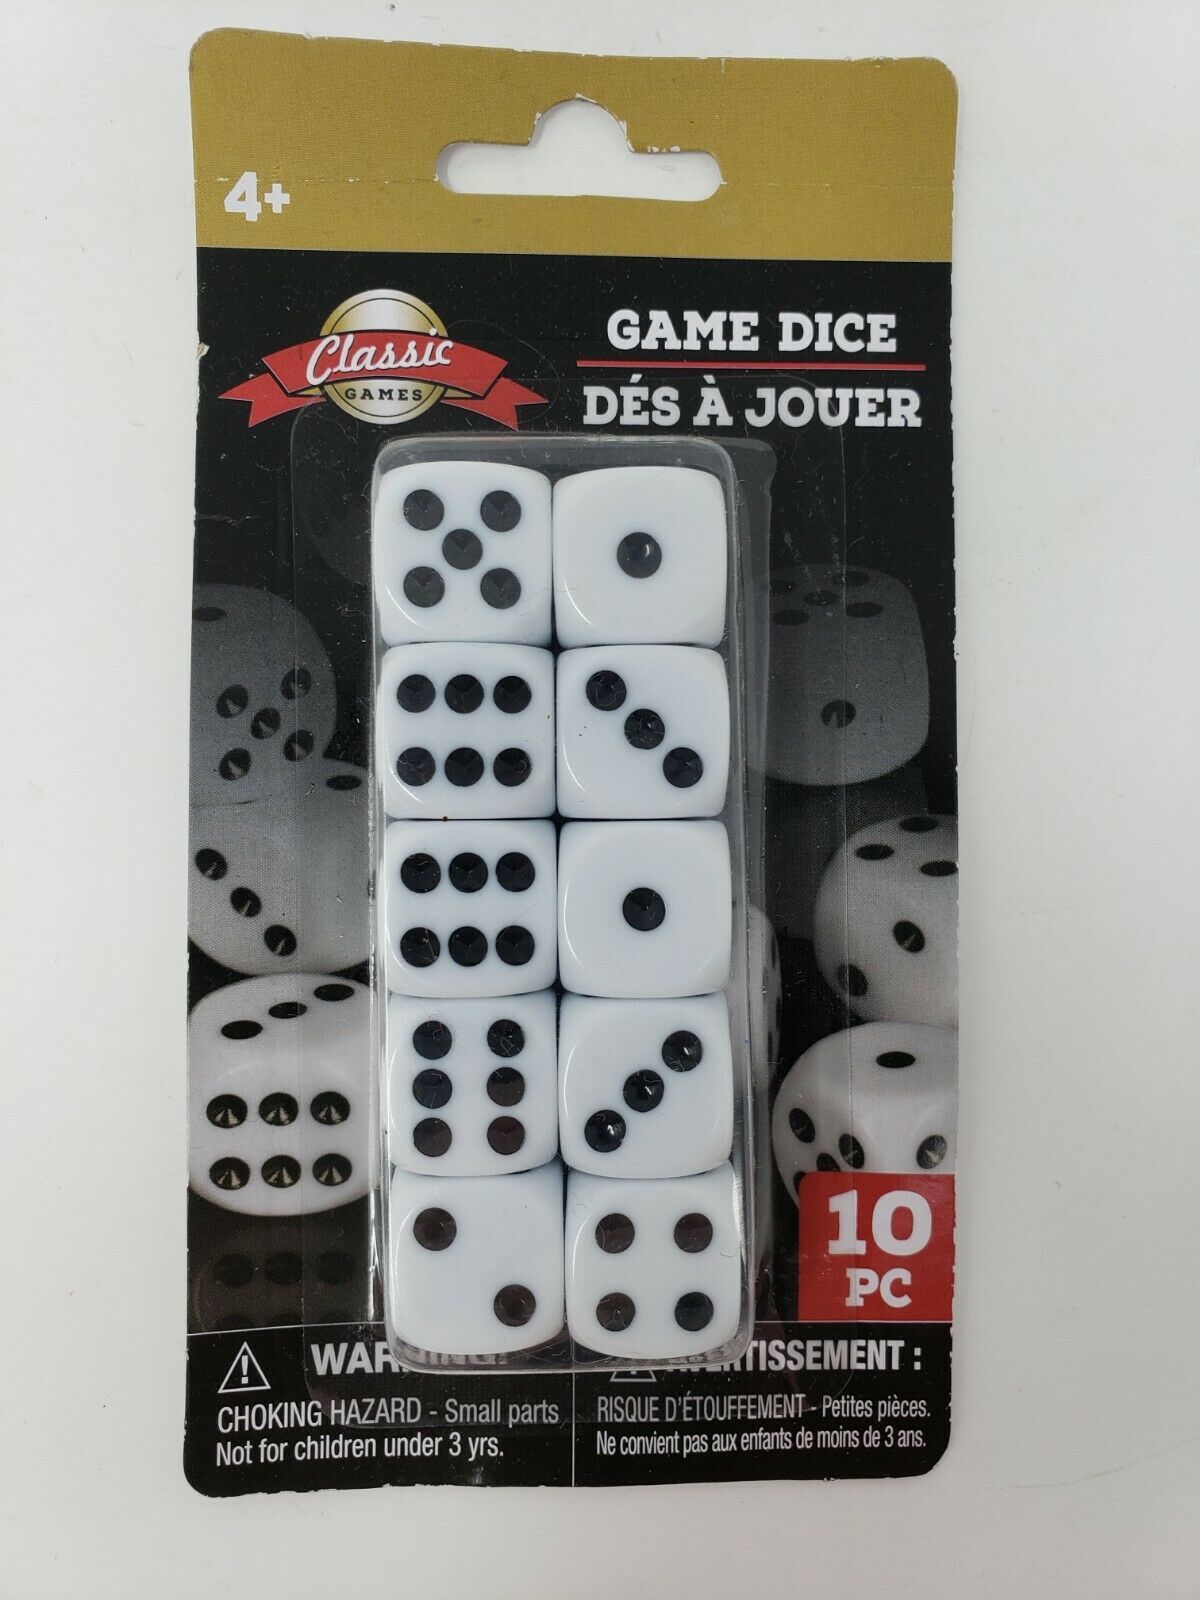 Classic Games 10 pc. Game Dice - New